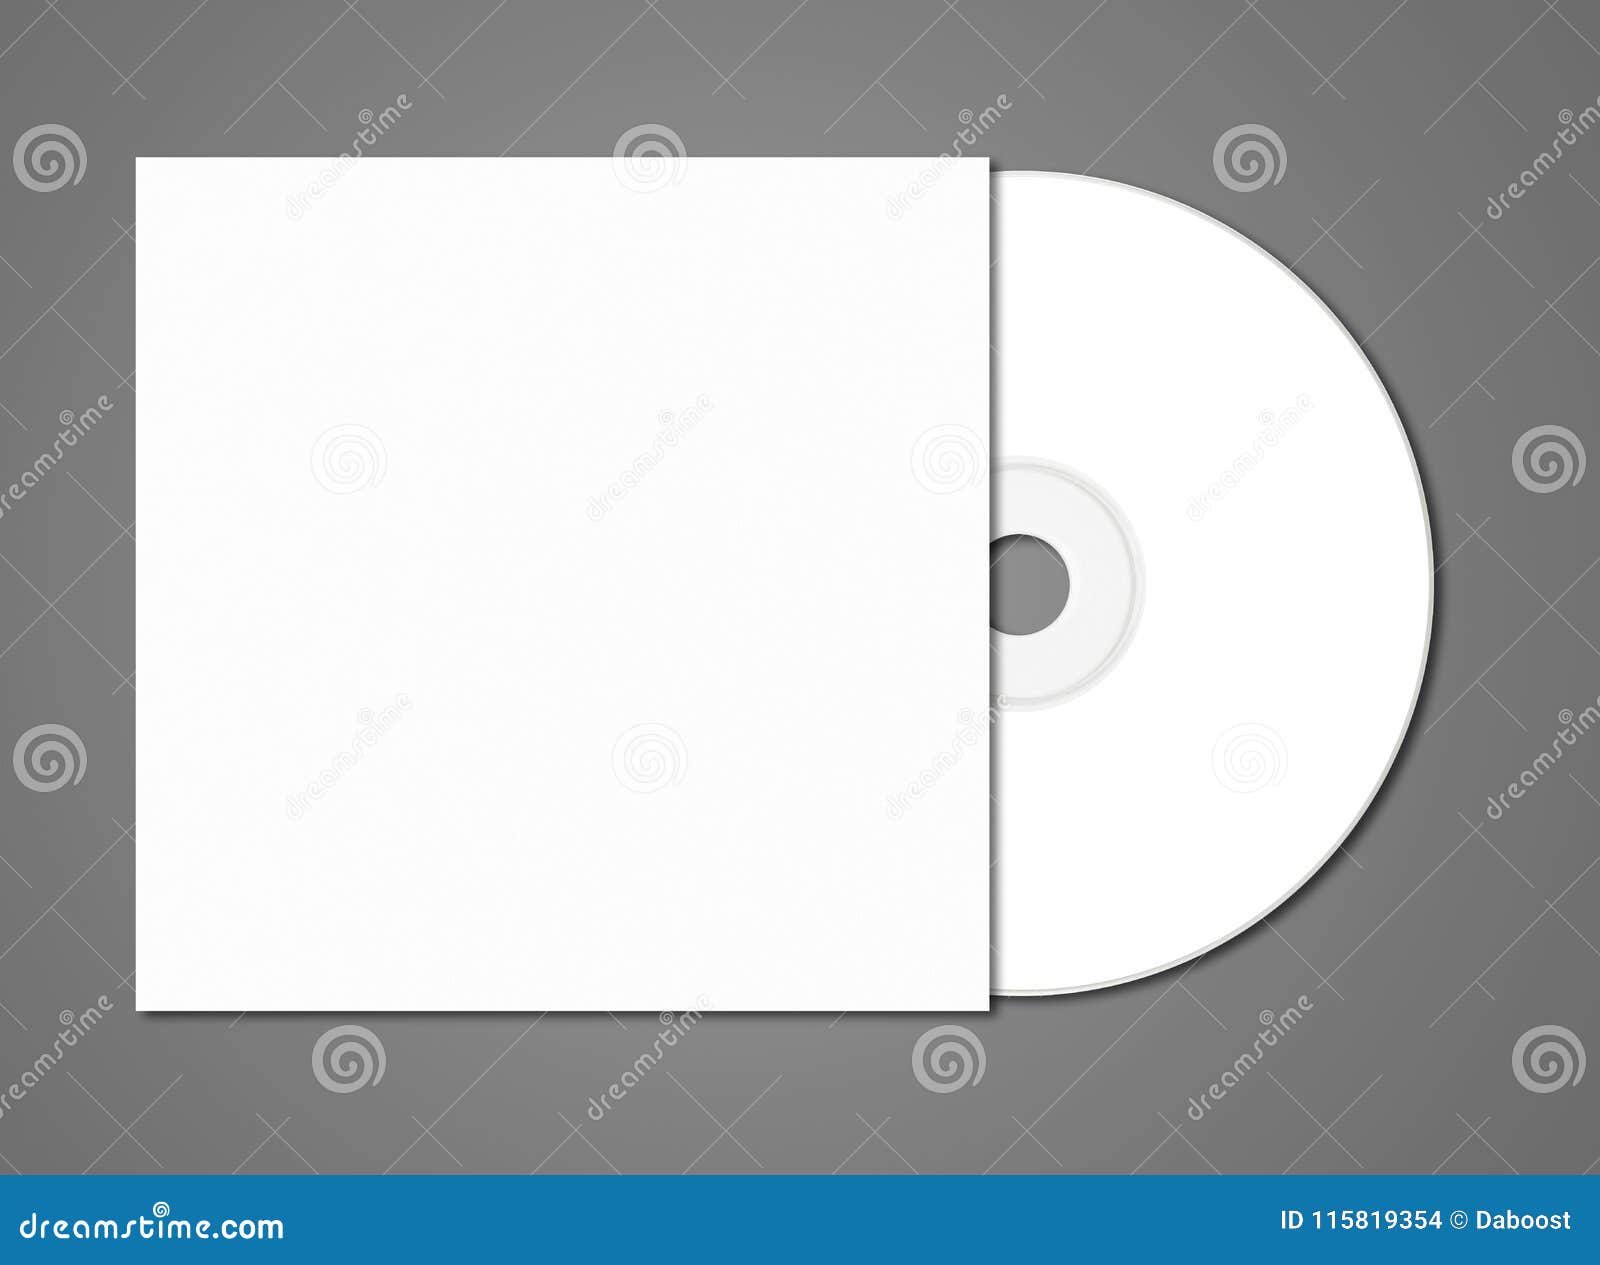 CD-DVD Mock Up - After Effects Templates